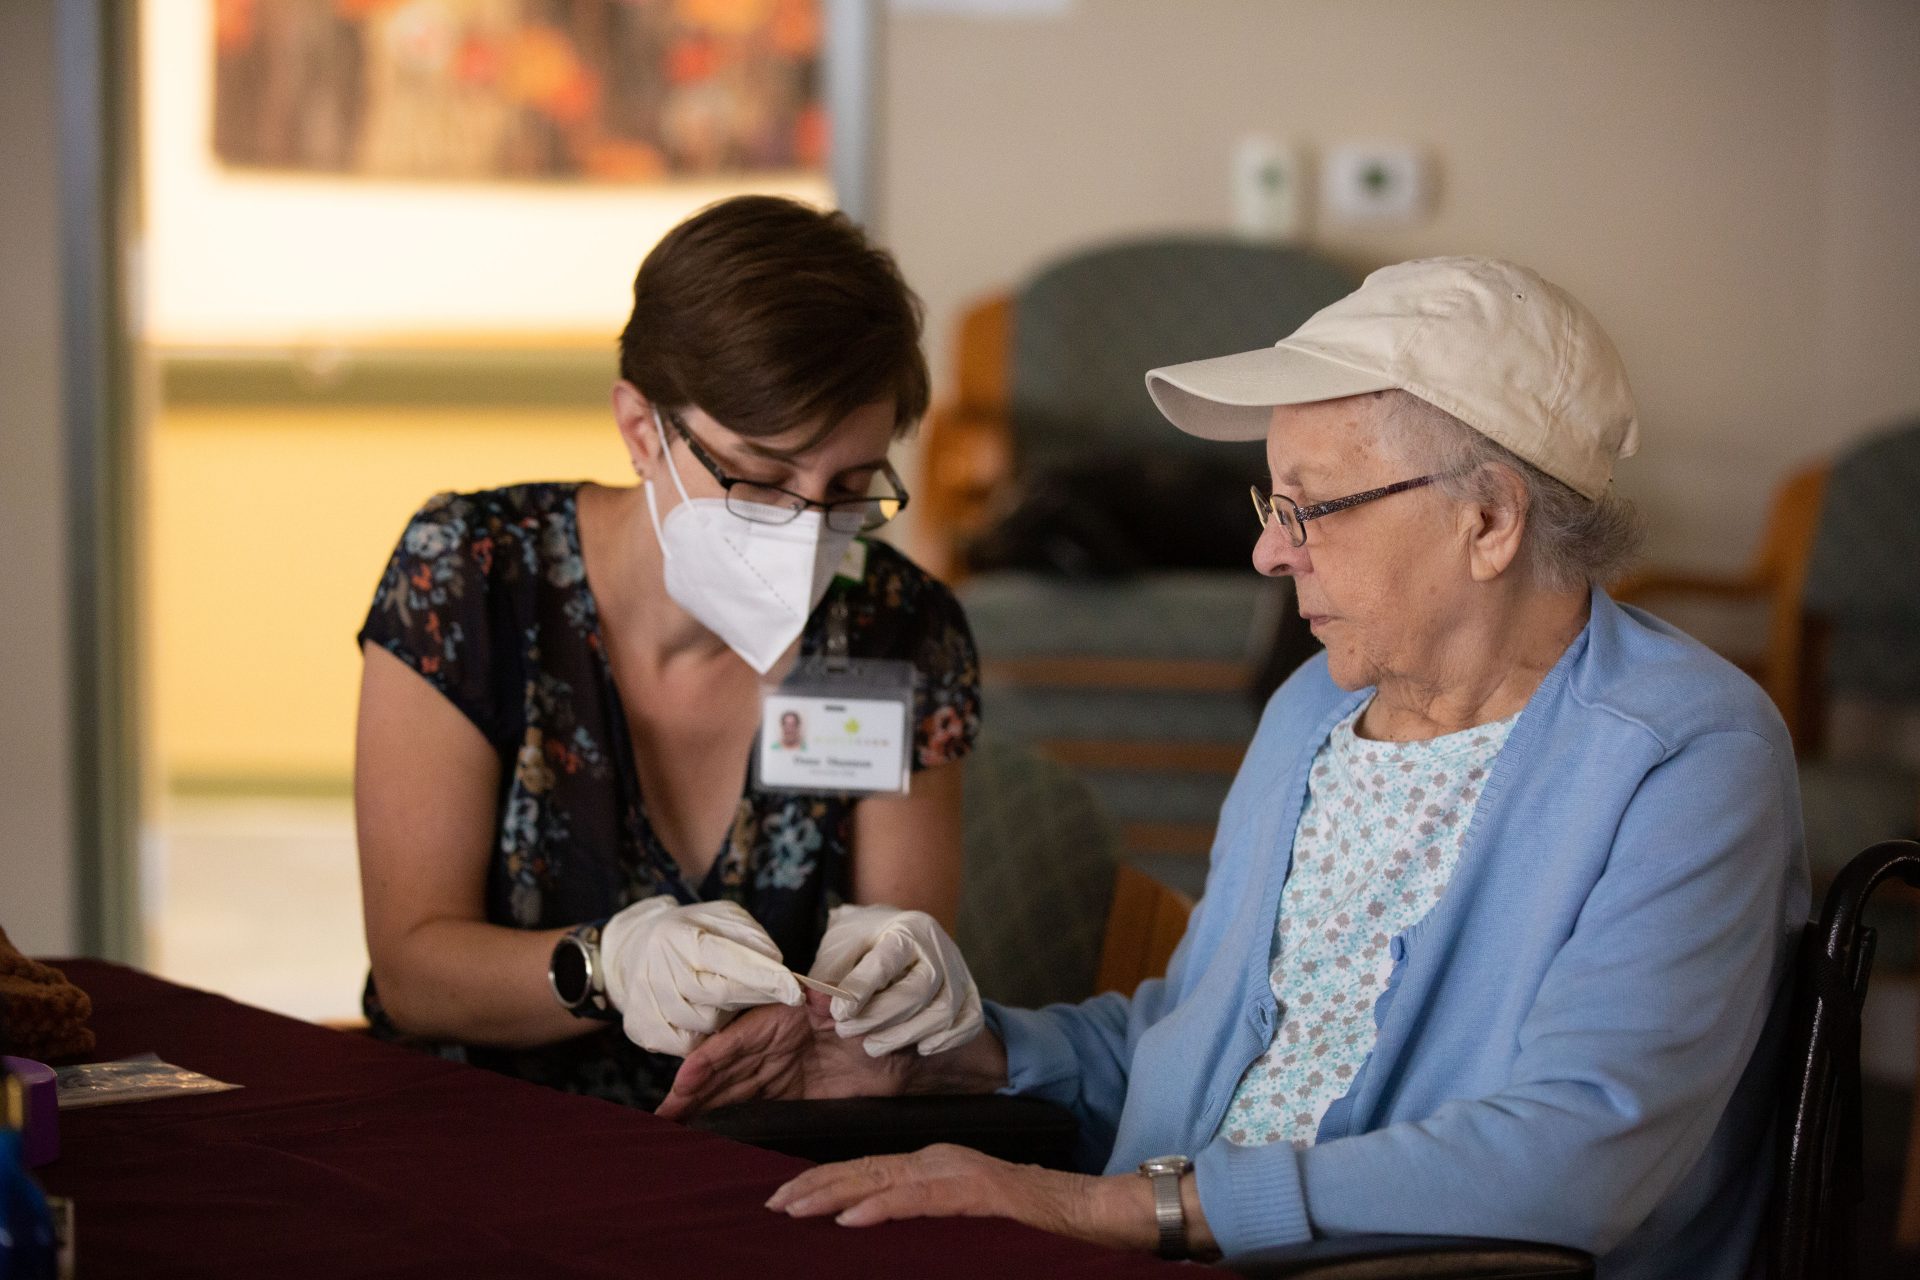 Person centered care, team member filing a residents nails.